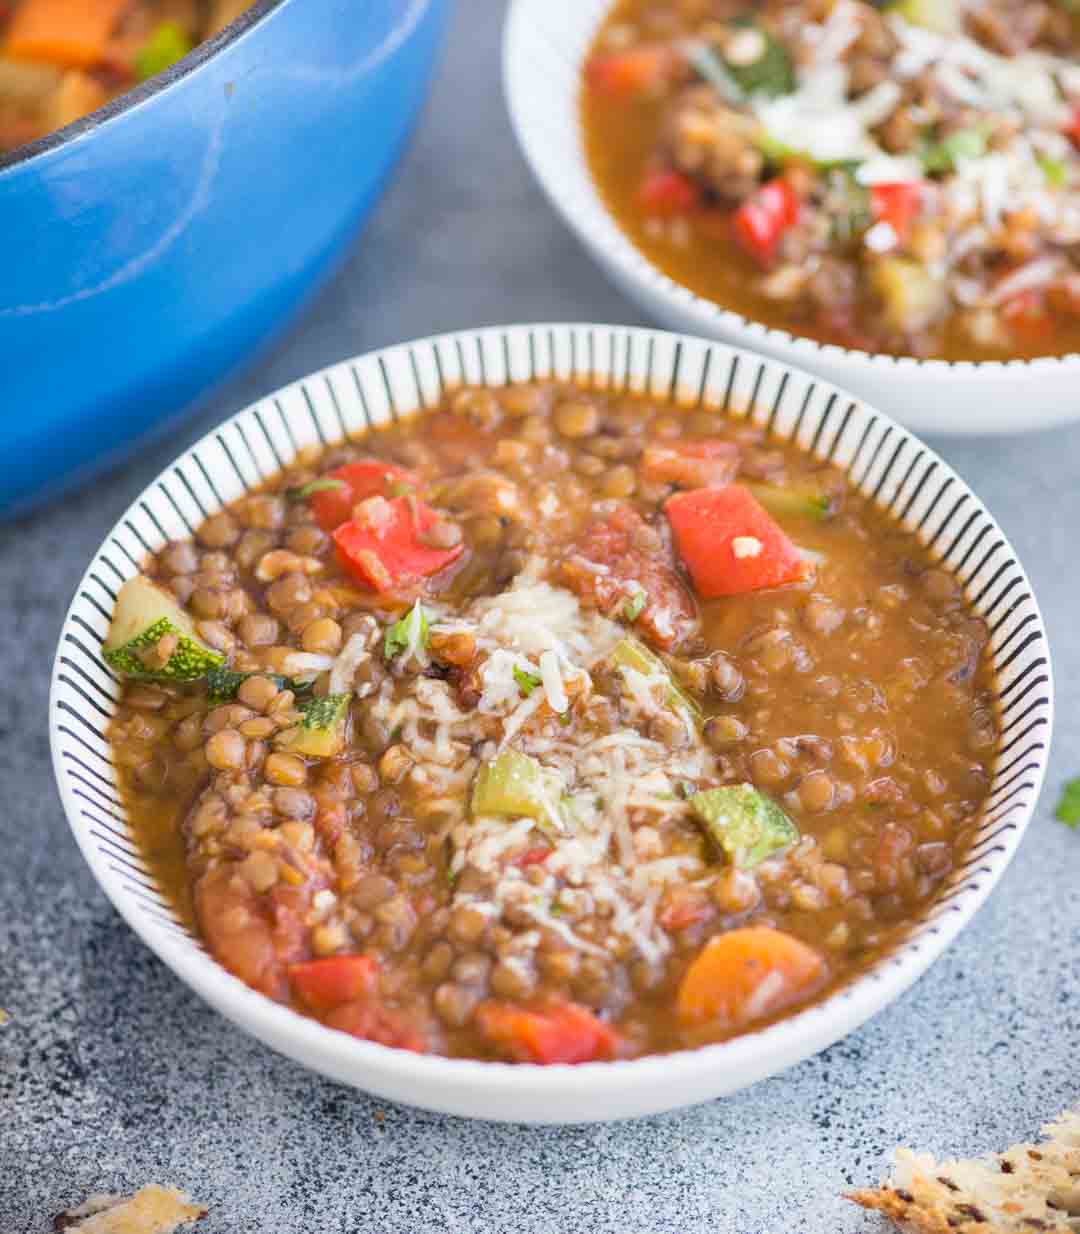 Lentil Soup with array load of vegetables is a filling one-pot vegan meal. Made with Lentils, Zucchini, Carrot, Celery, this soup is loaded with plant-based protein and fiber.